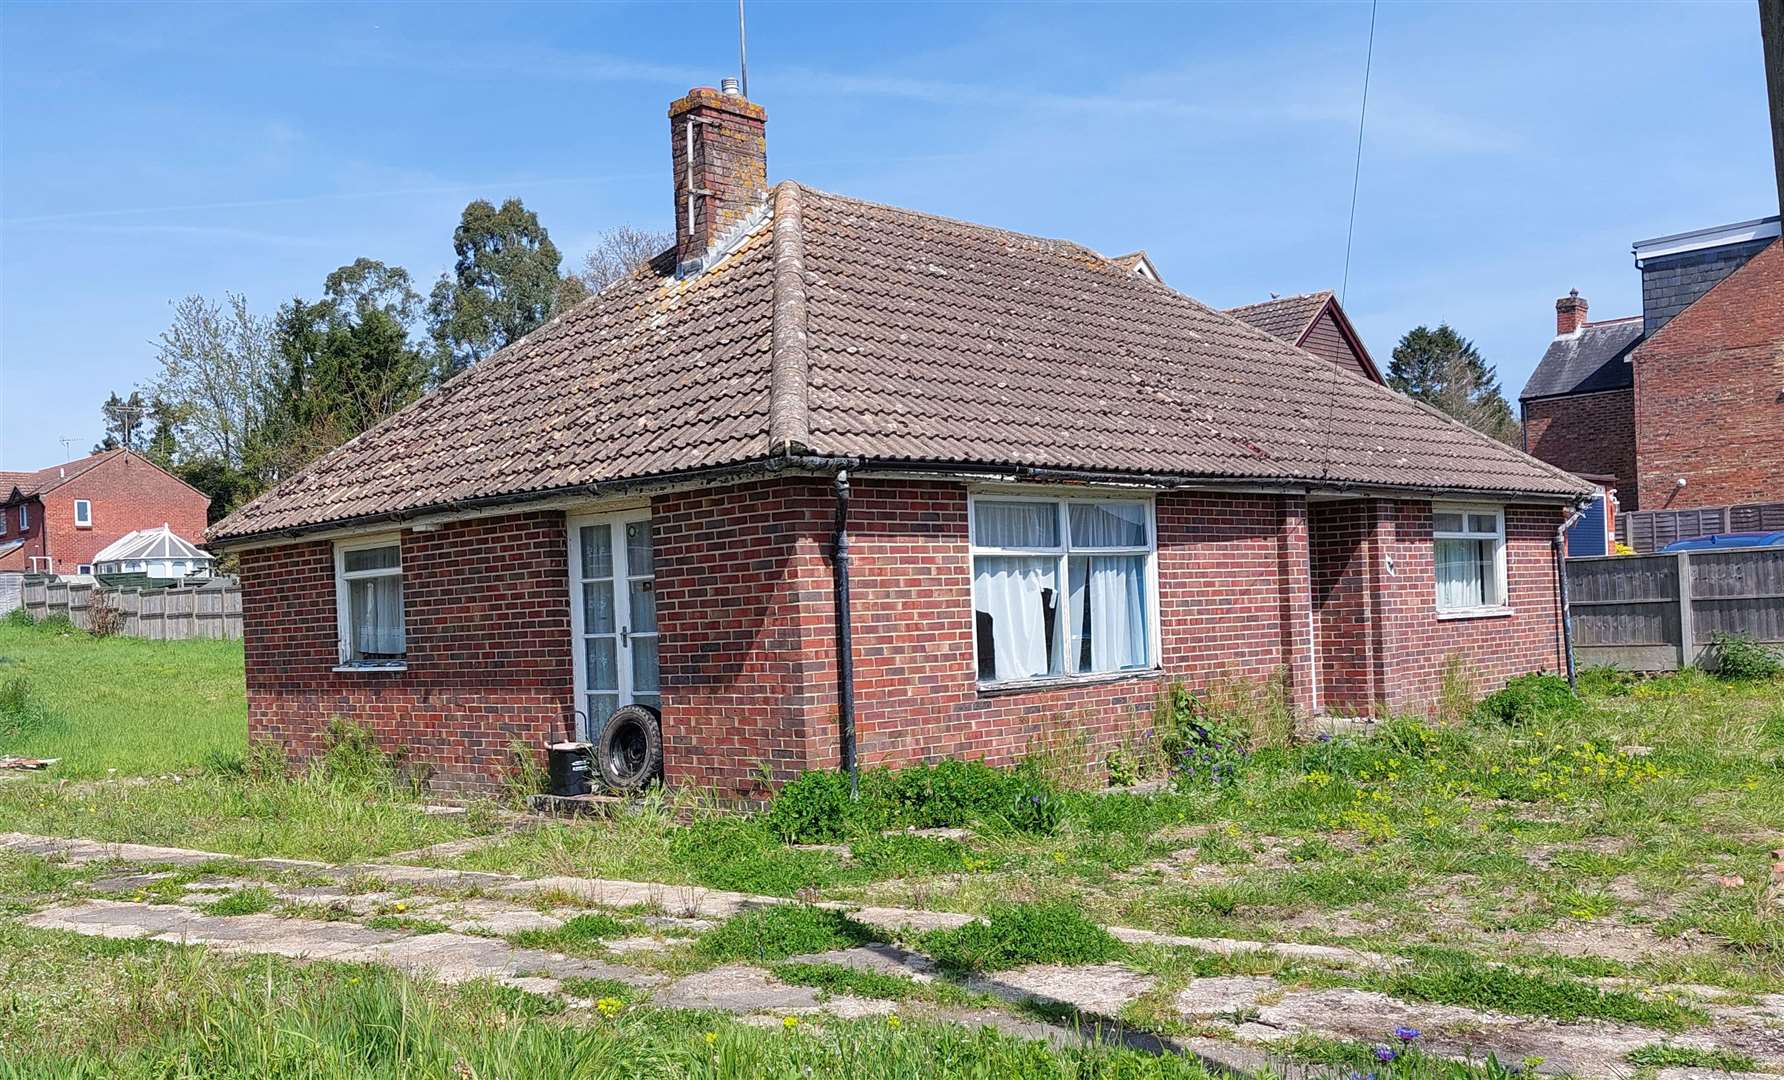 The existing bungalow has fallen into disrepair